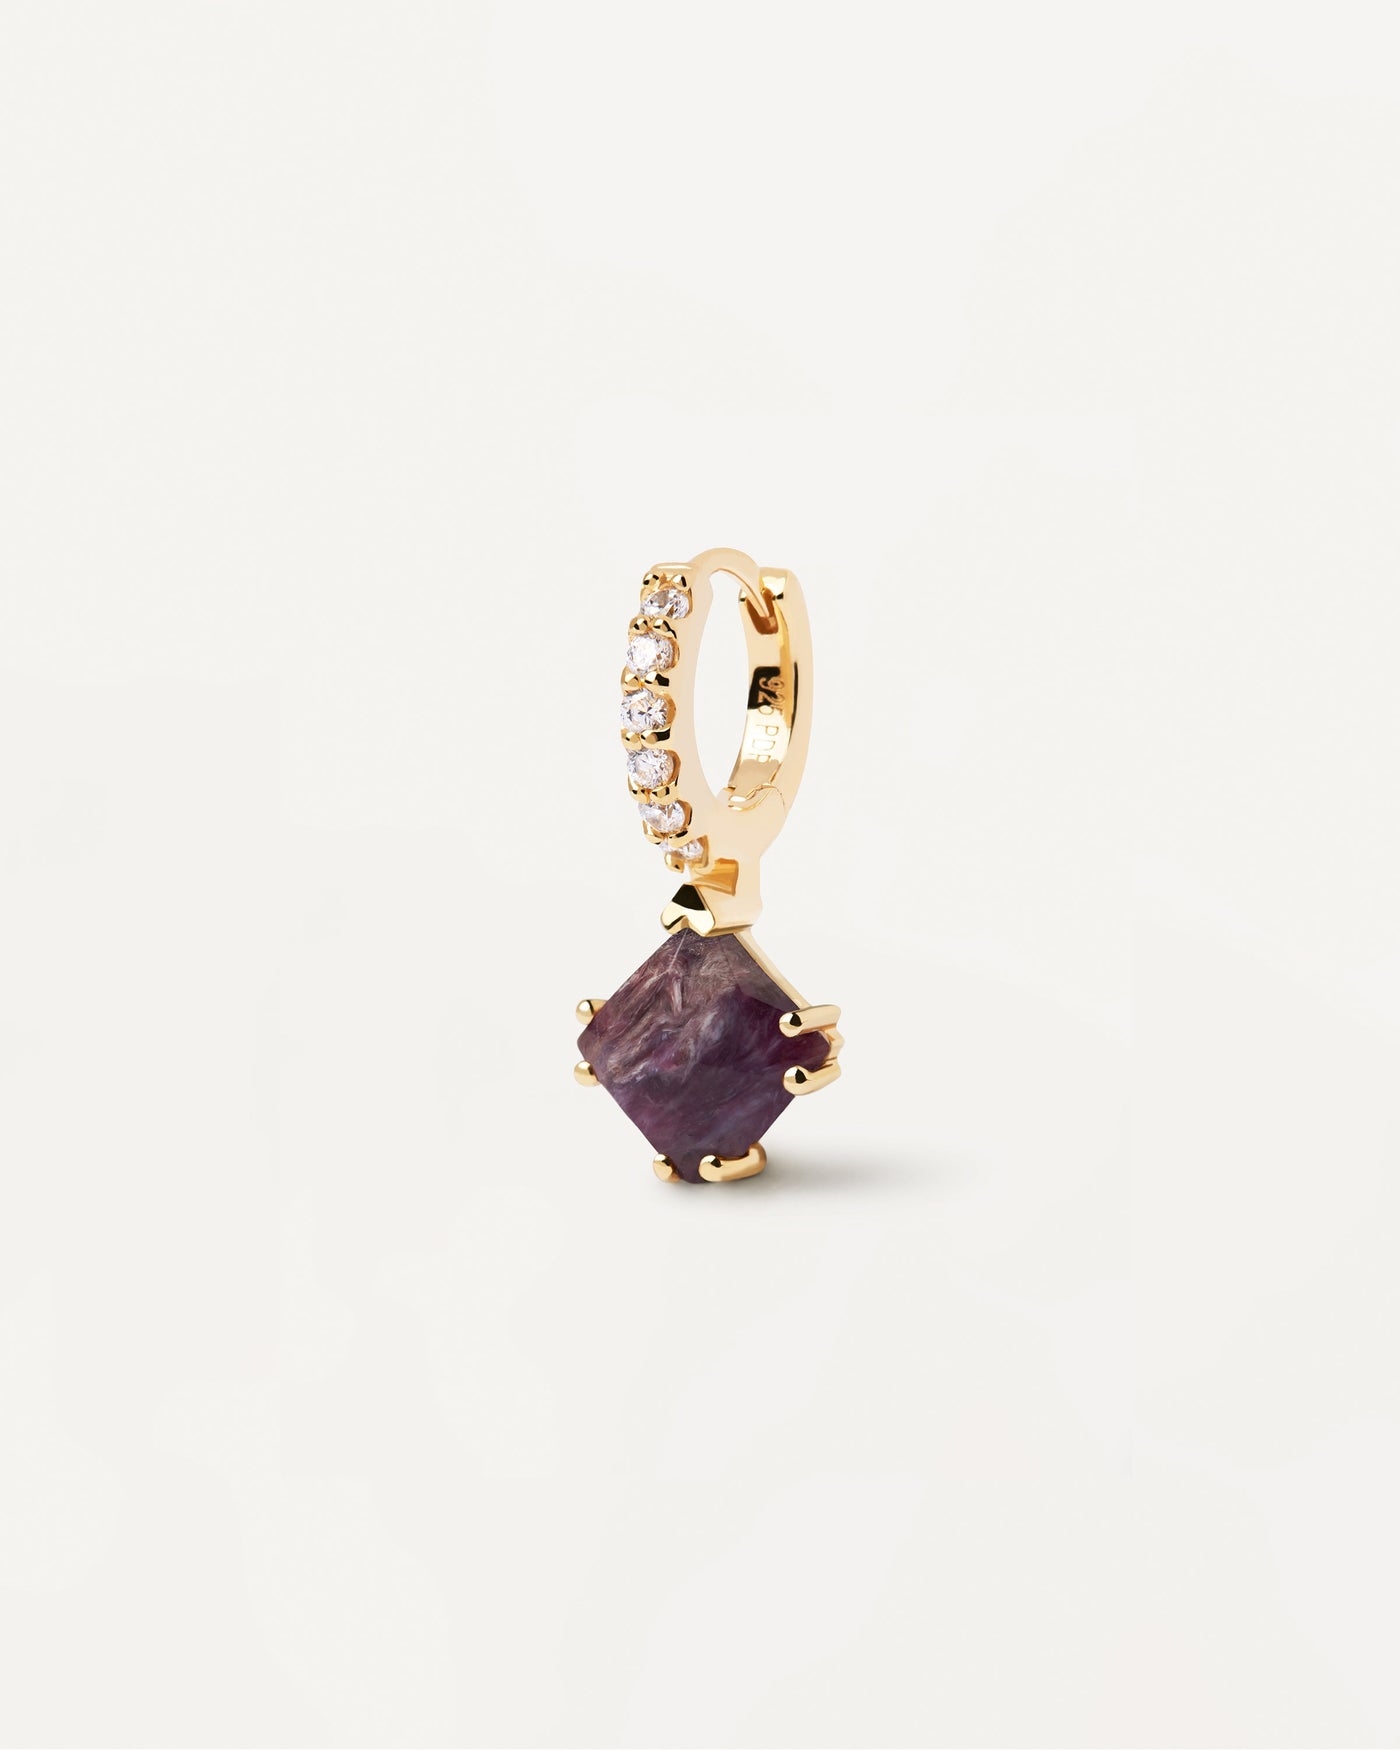 2023 Selection | Fuji Charoite Single Earring. Gold-plated hoop ear piercing with white zirconia and purple squared gemstone pendant. Get the latest arrival from PDPAOLA. Place your order safely and get this Best Seller. Free Shipping.